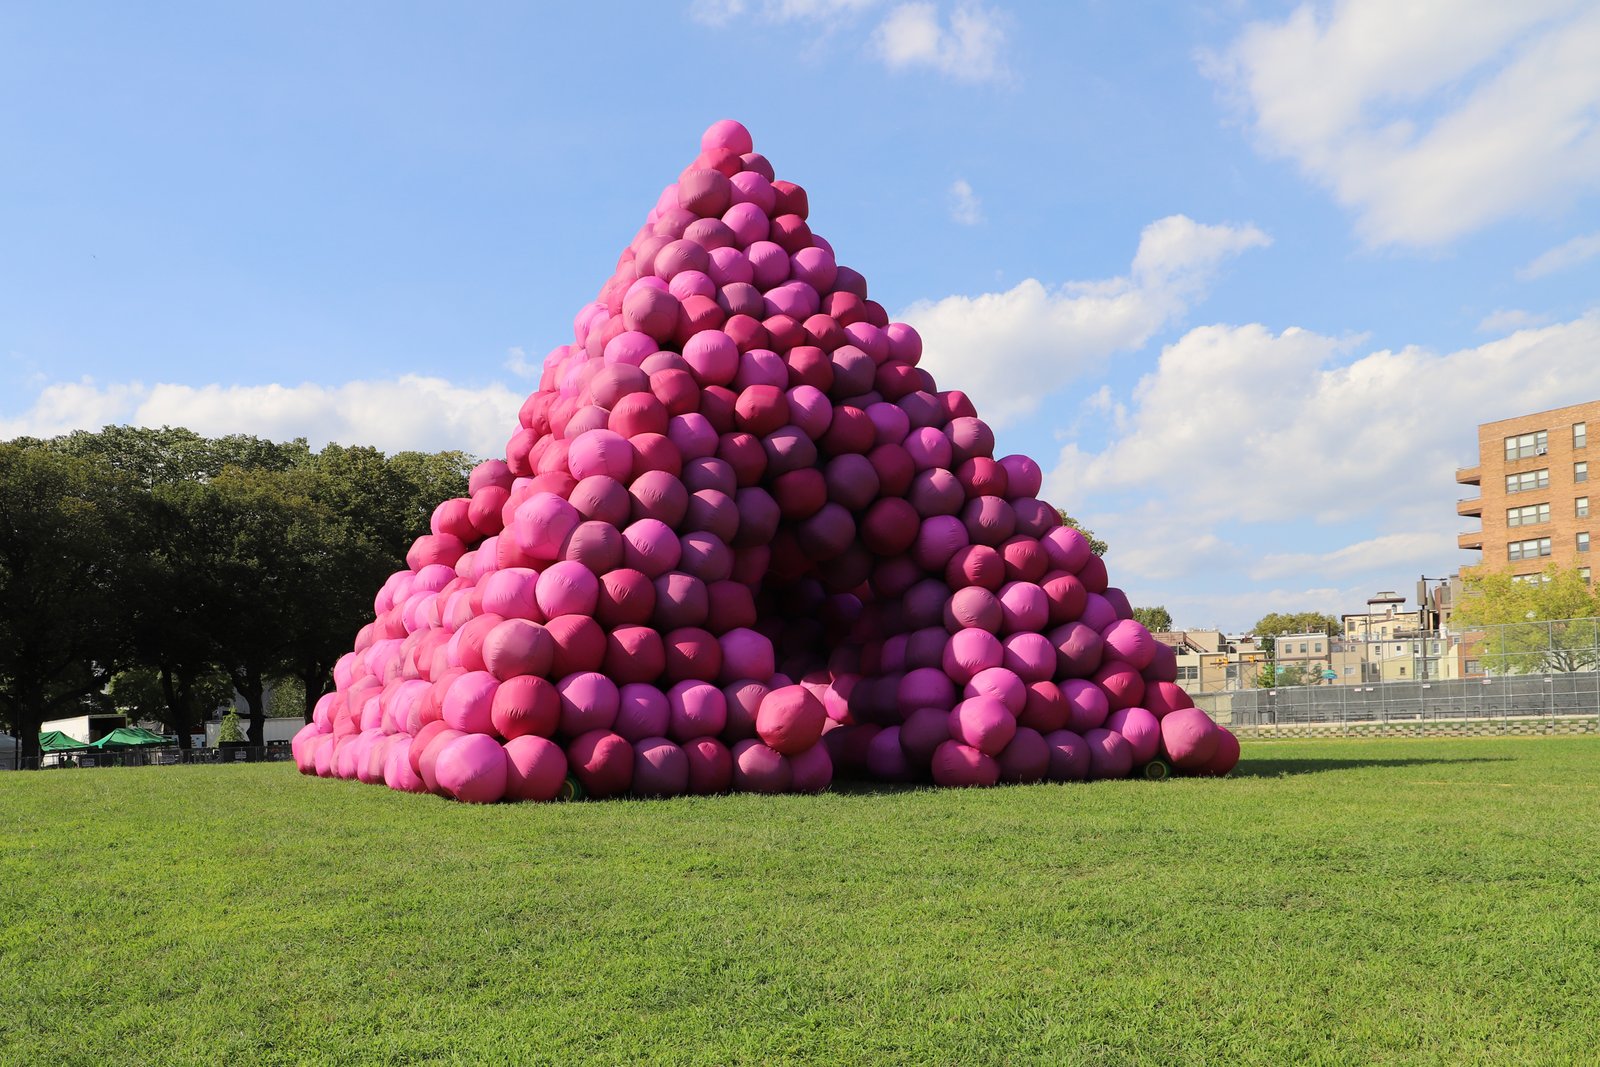 A large pyramid structure made from what appear to be purple balloons standing in a grassy field